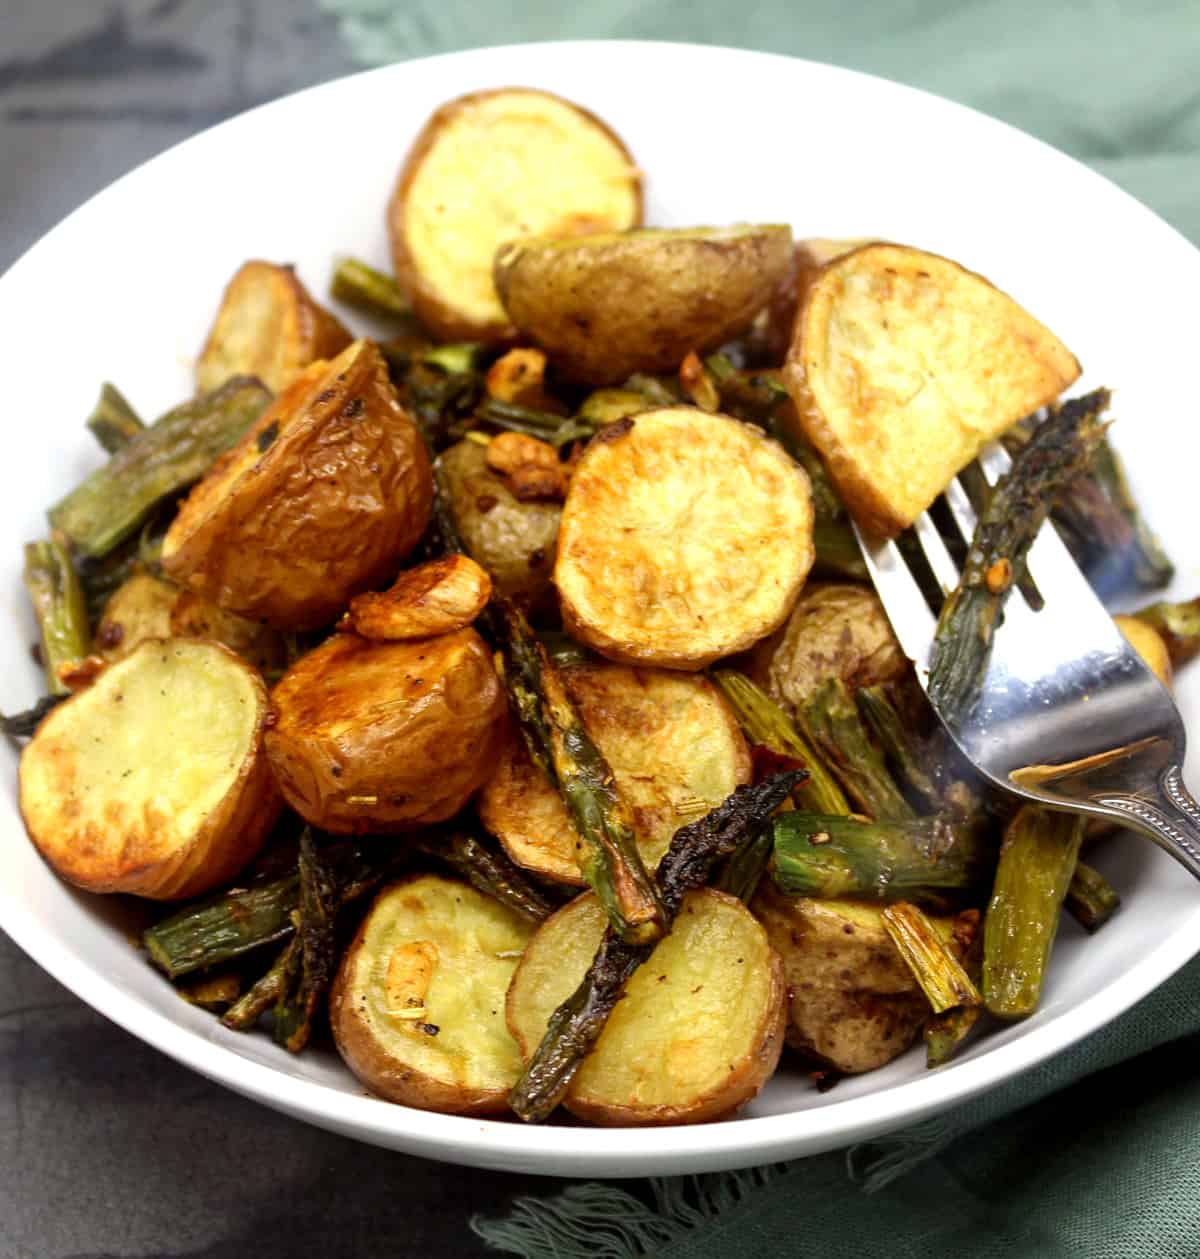 Garlic roasted asparagus and potatoes in a bowl.